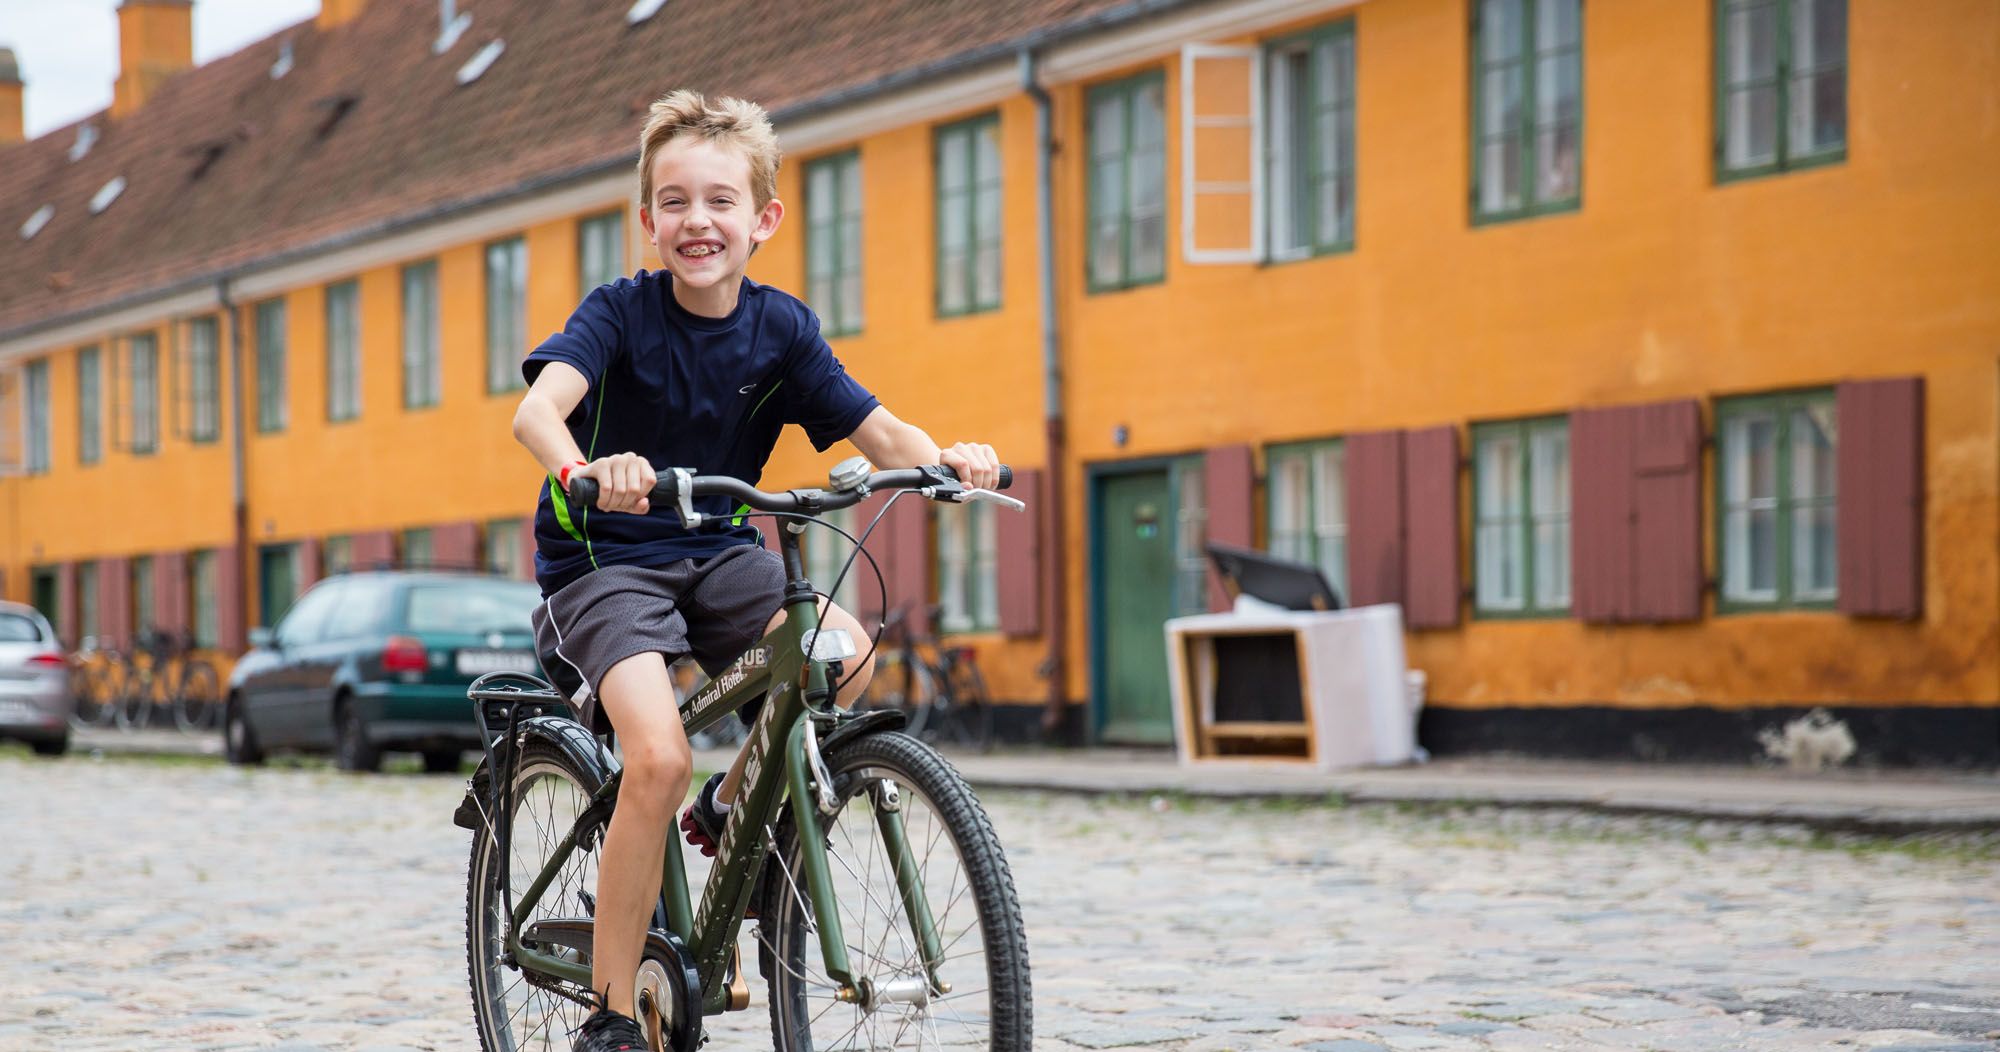 Featured image for “Why Copenhagen Just May be the Happiest Destination in Europe”